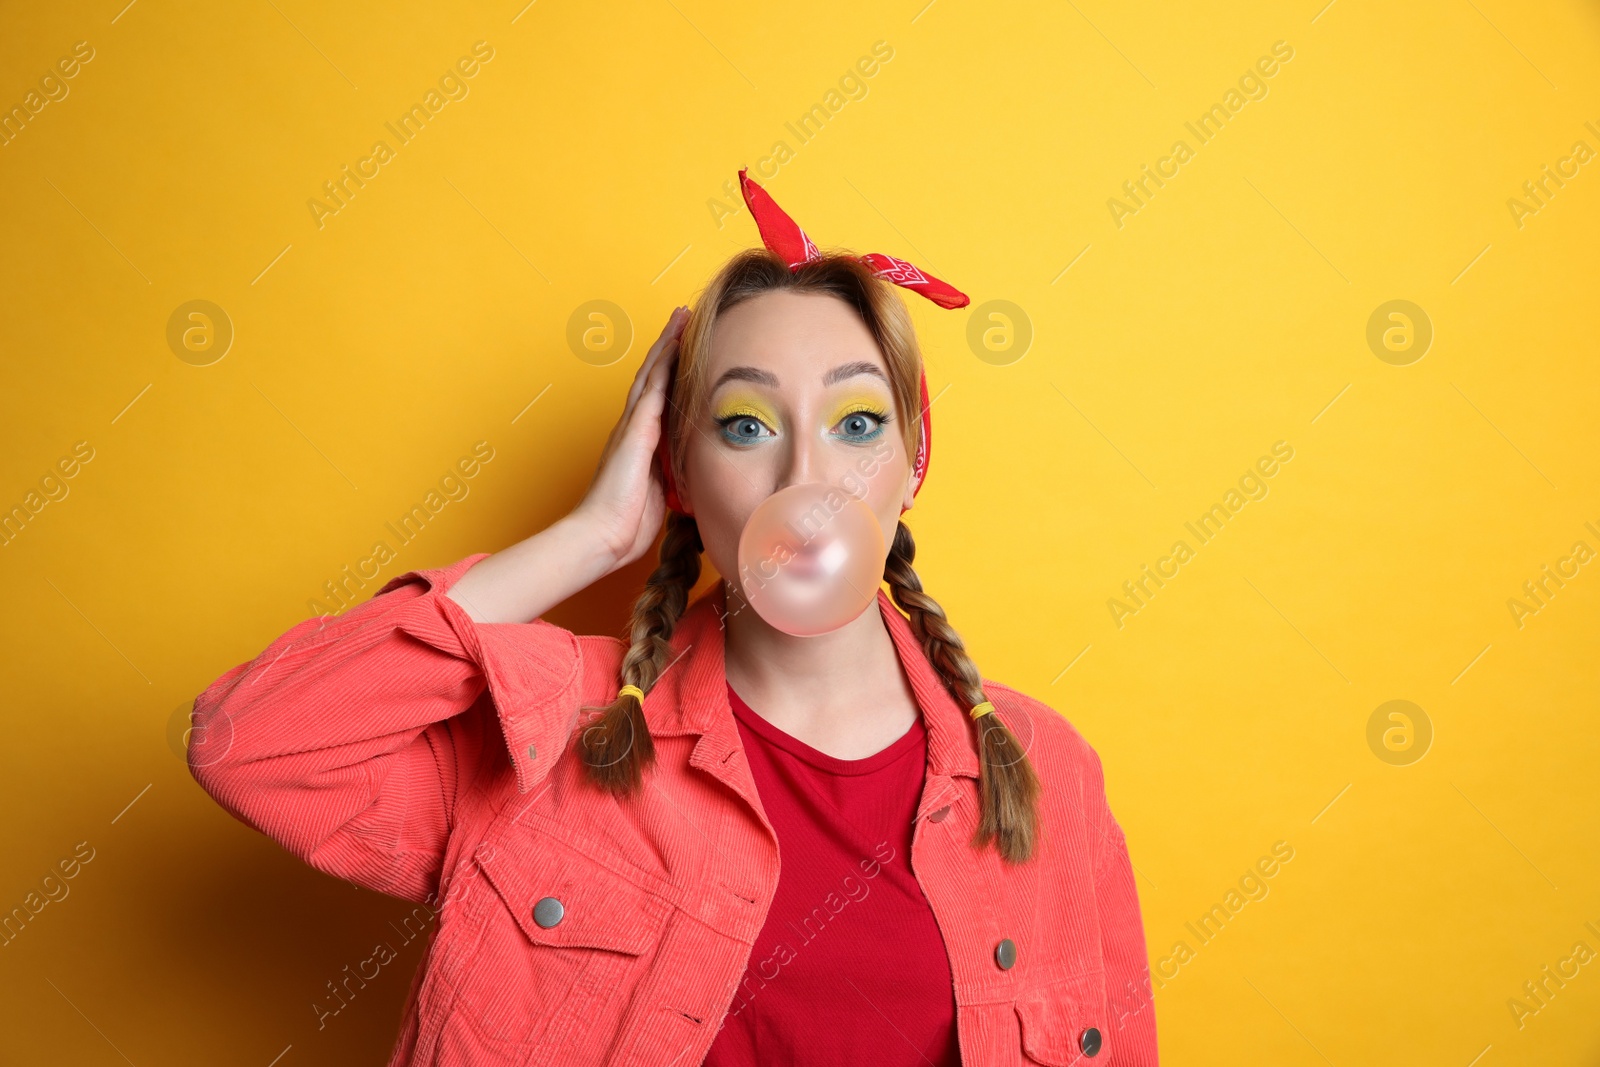 Photo of Fashionable young woman with braids and bright makeup blowing bubblegum on yellow background